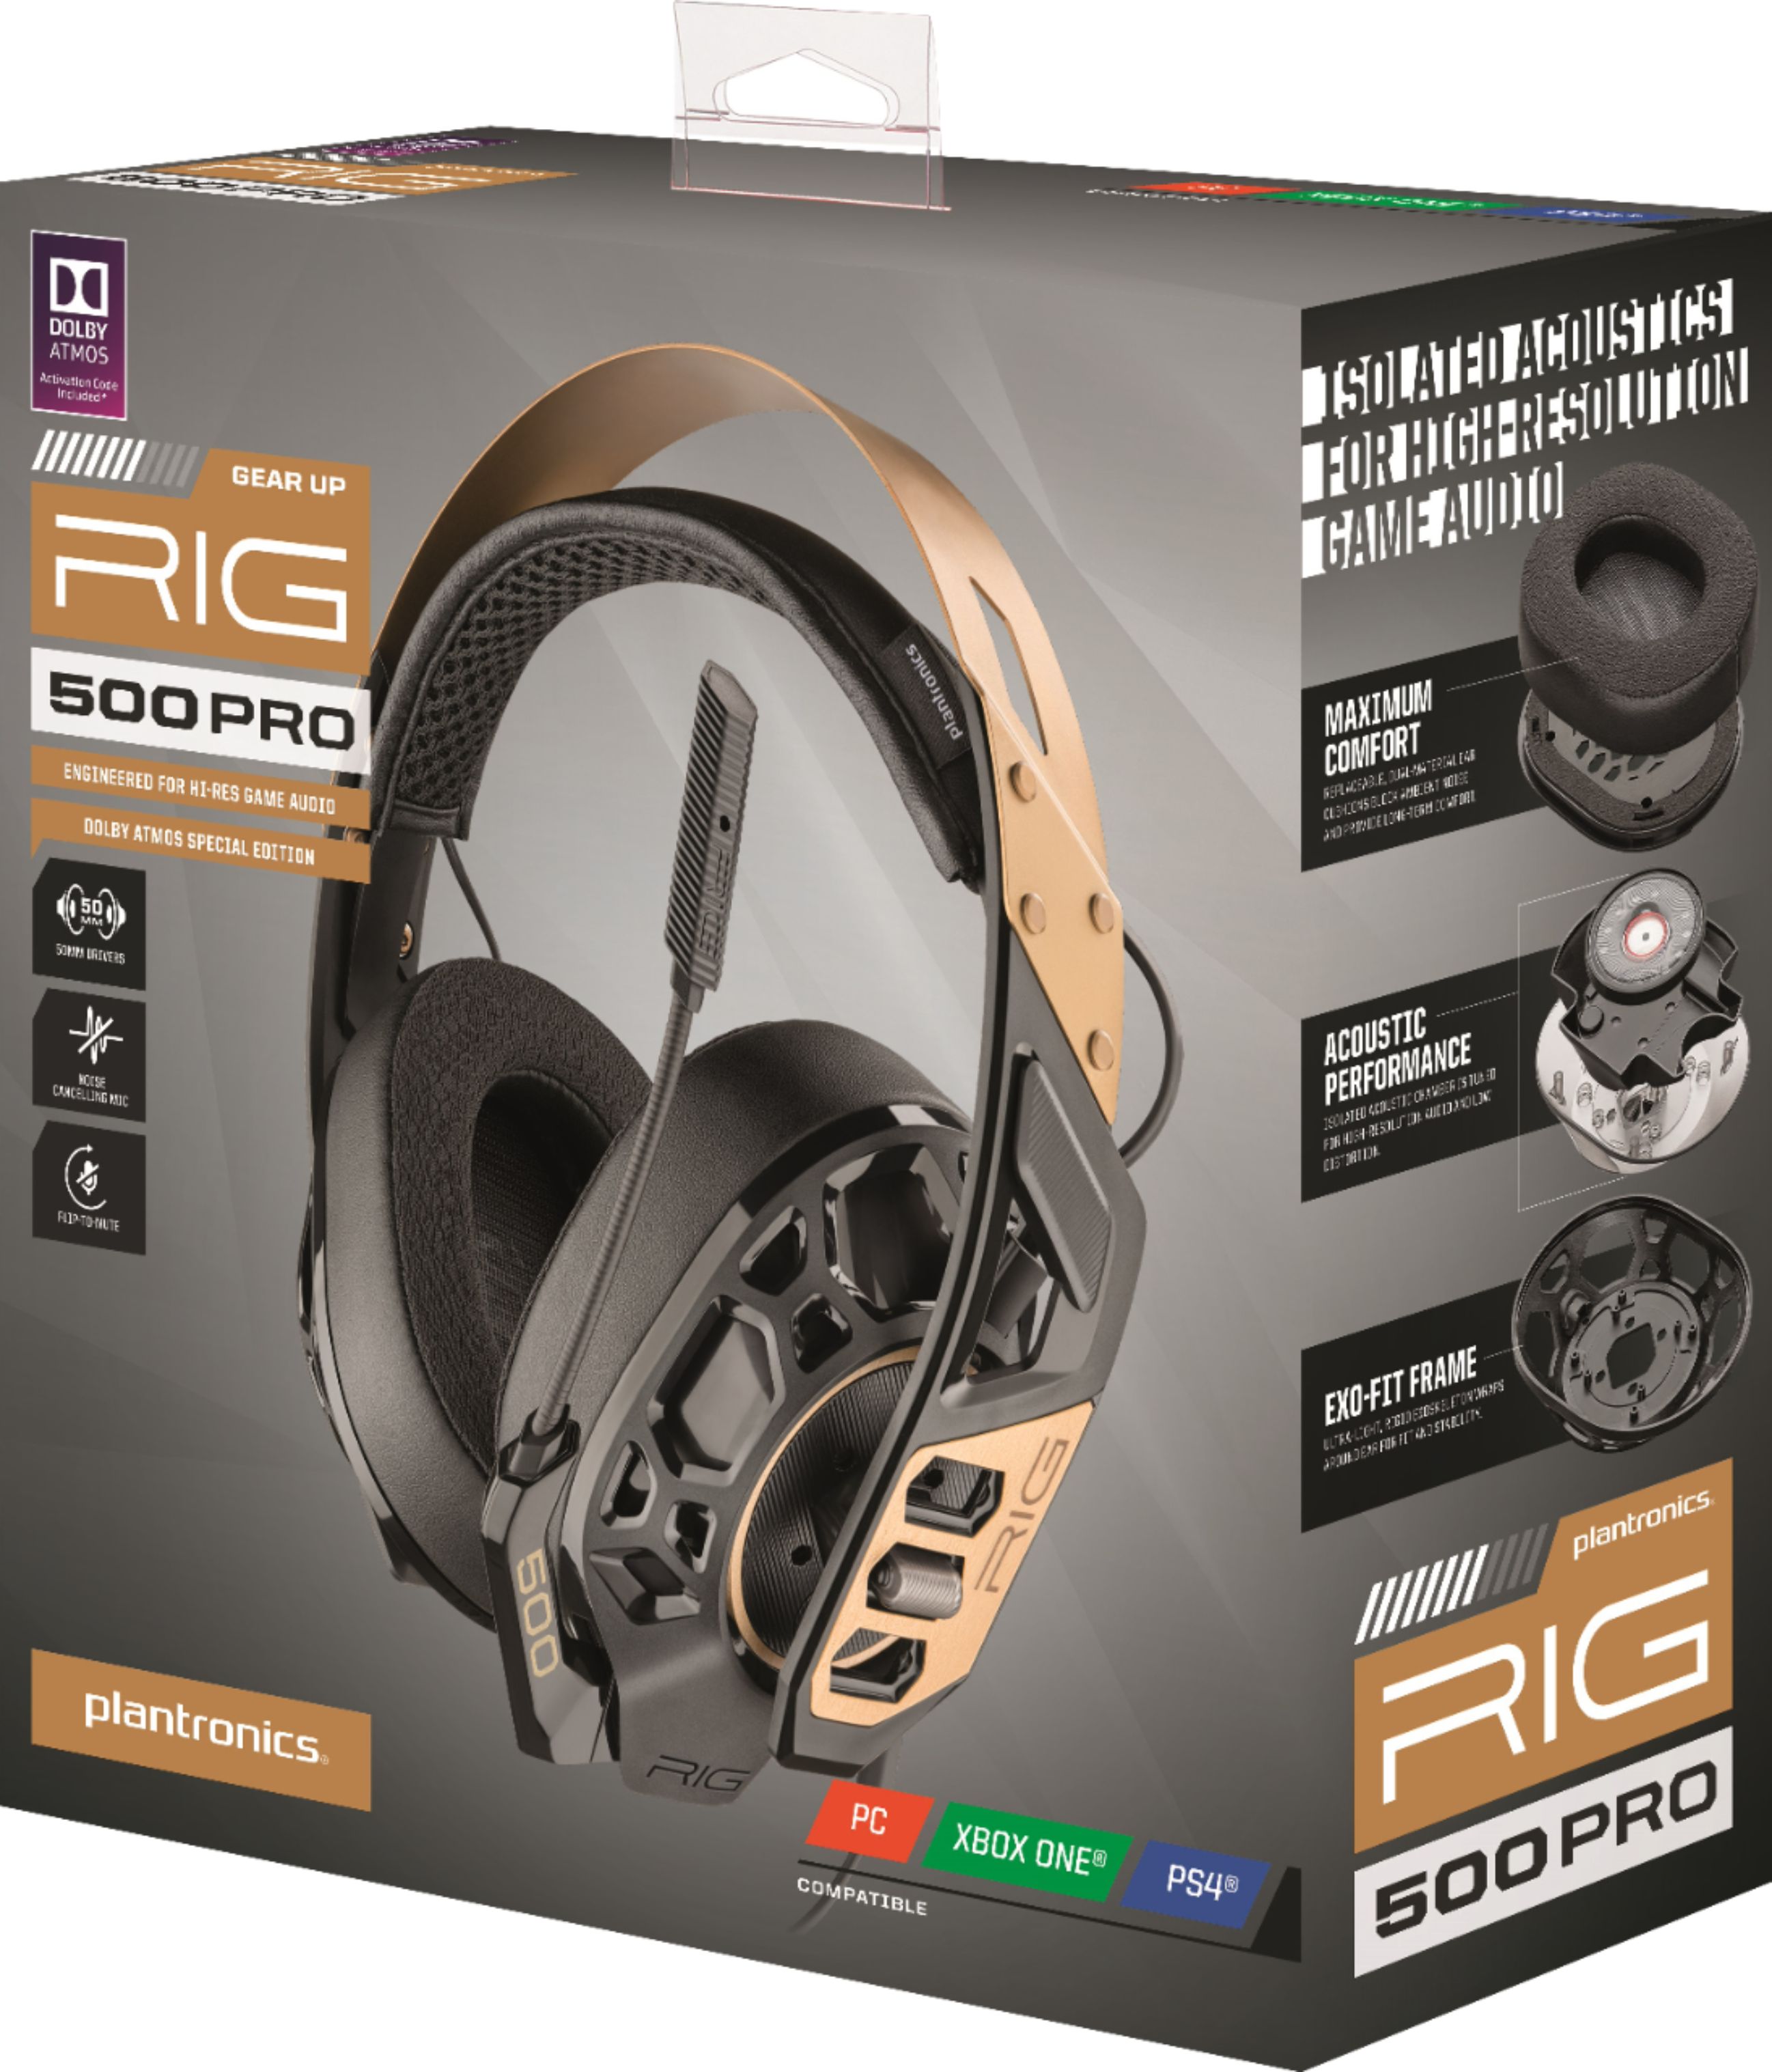 rig 500 pro hx dolby atmos gaming headset for xbox one